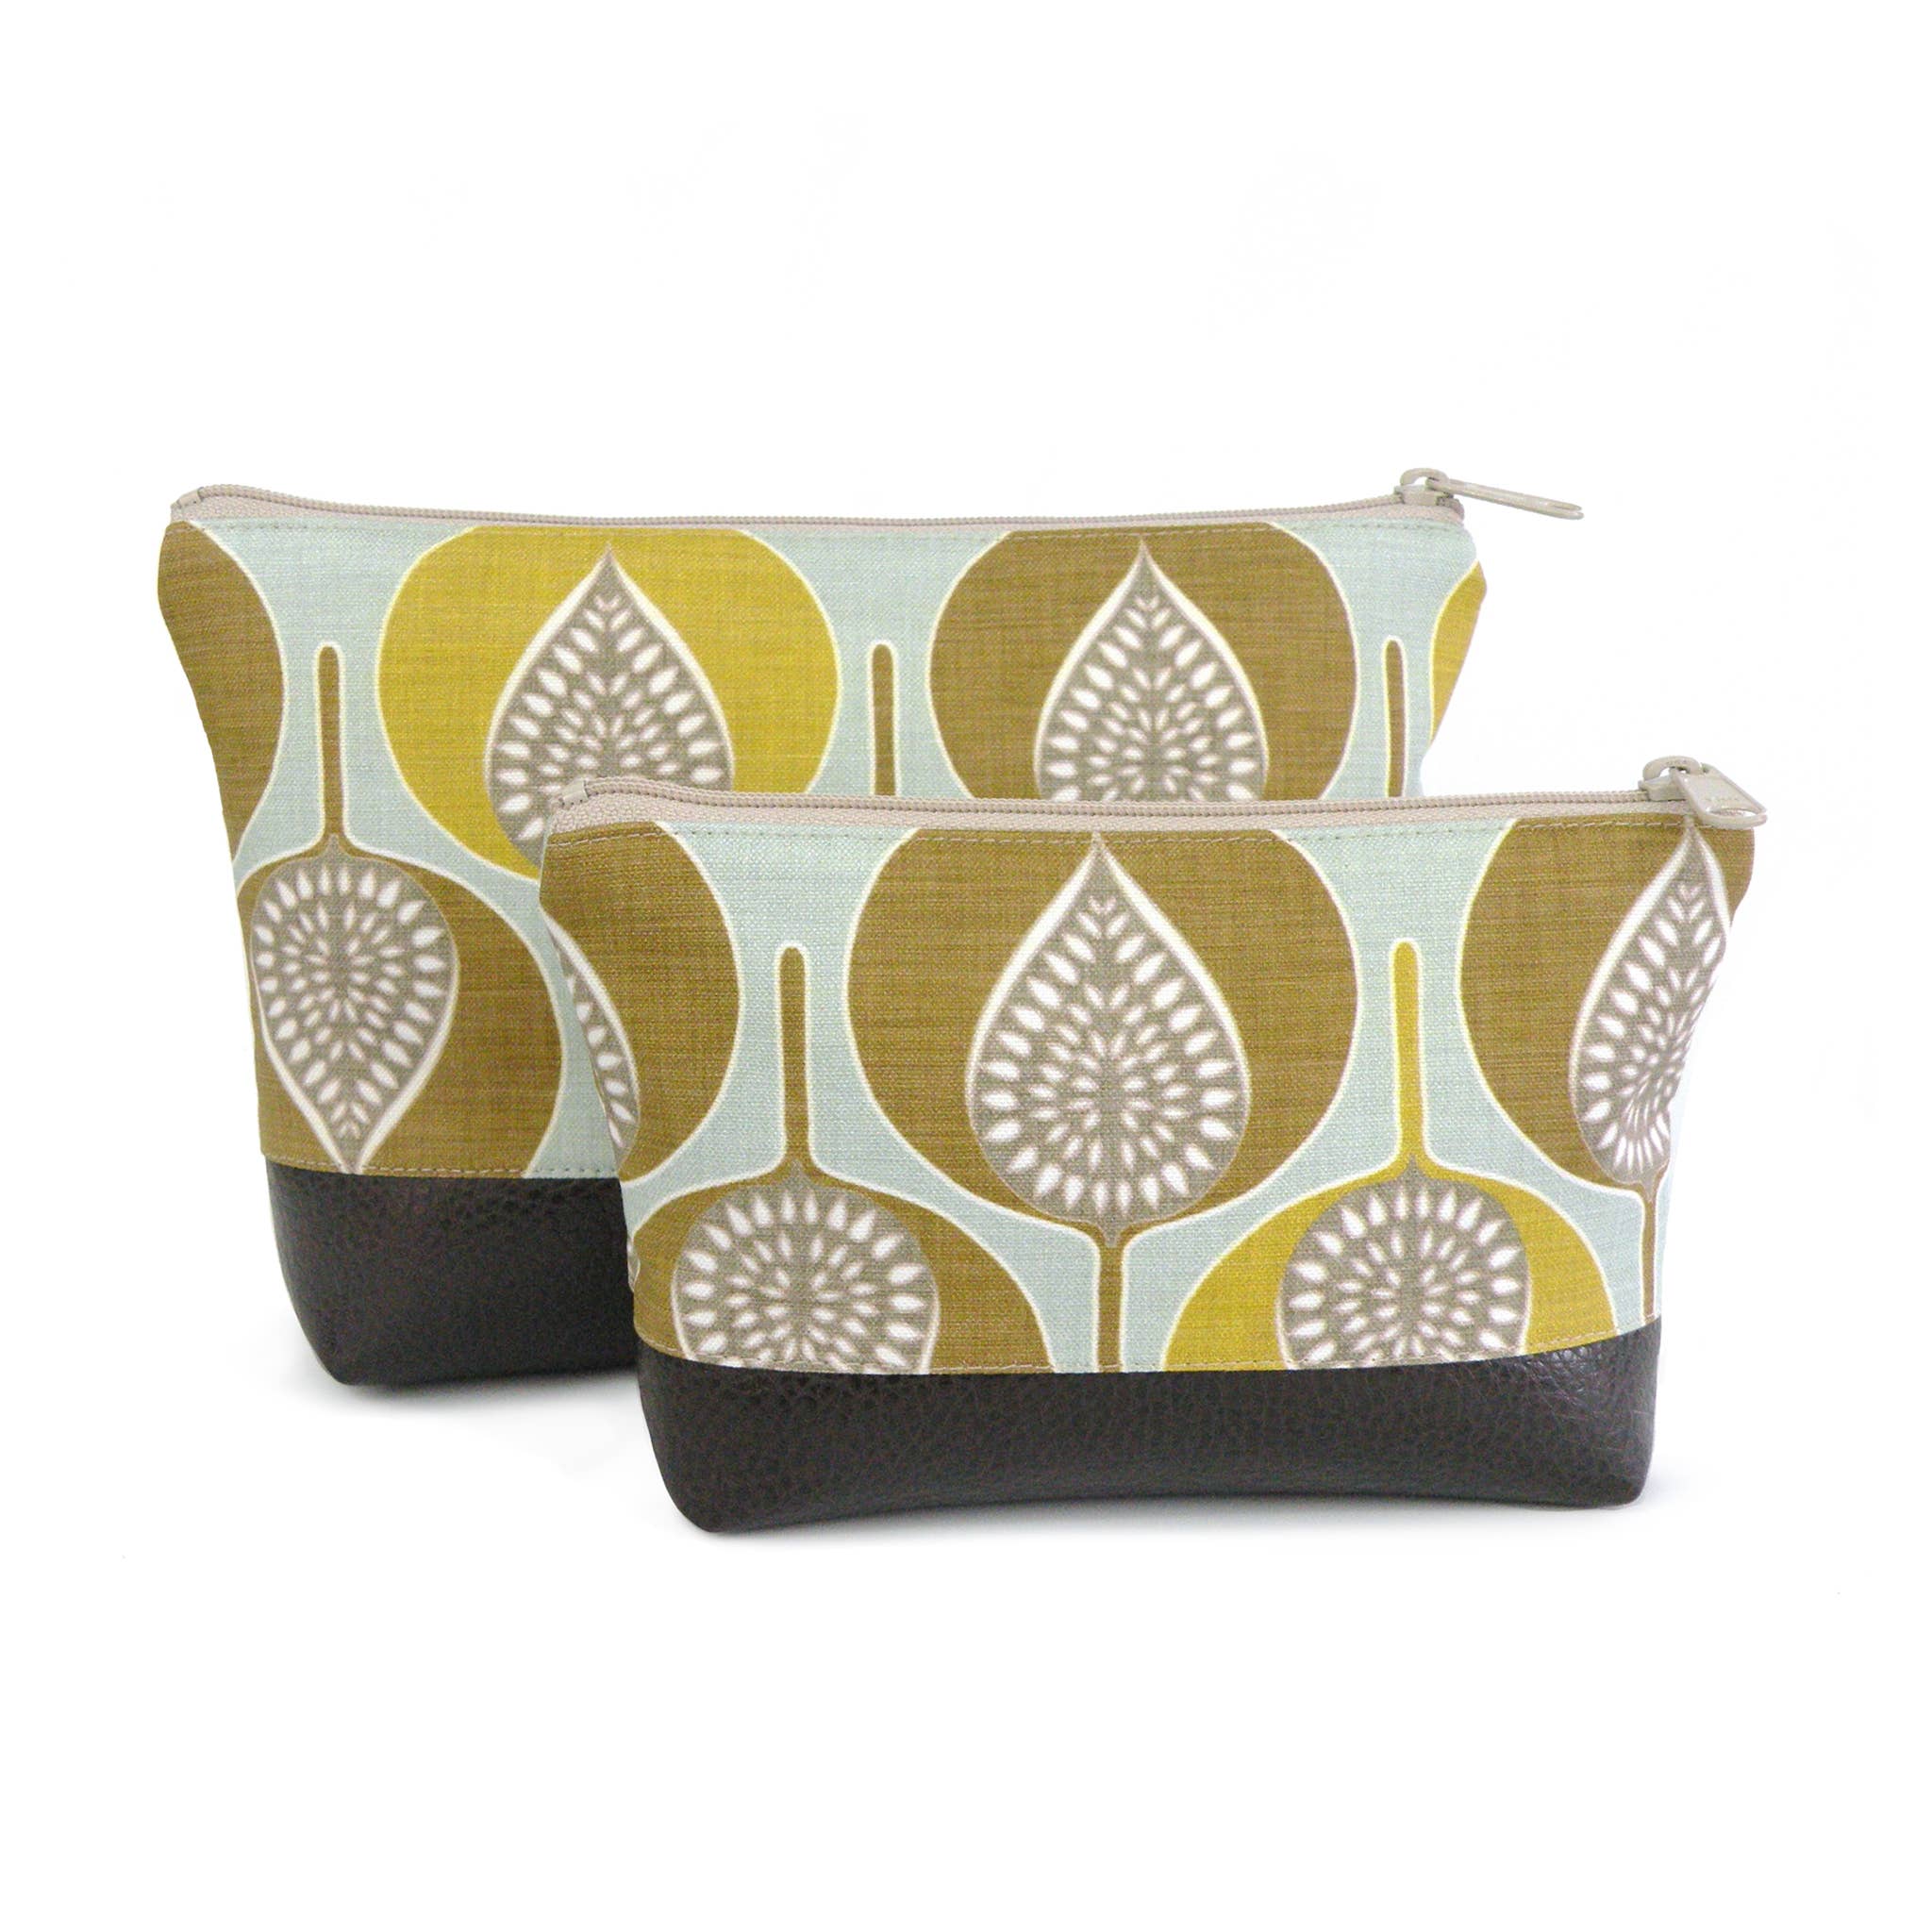 Small Cosmetic Clutch in Modern Green Leaves Print